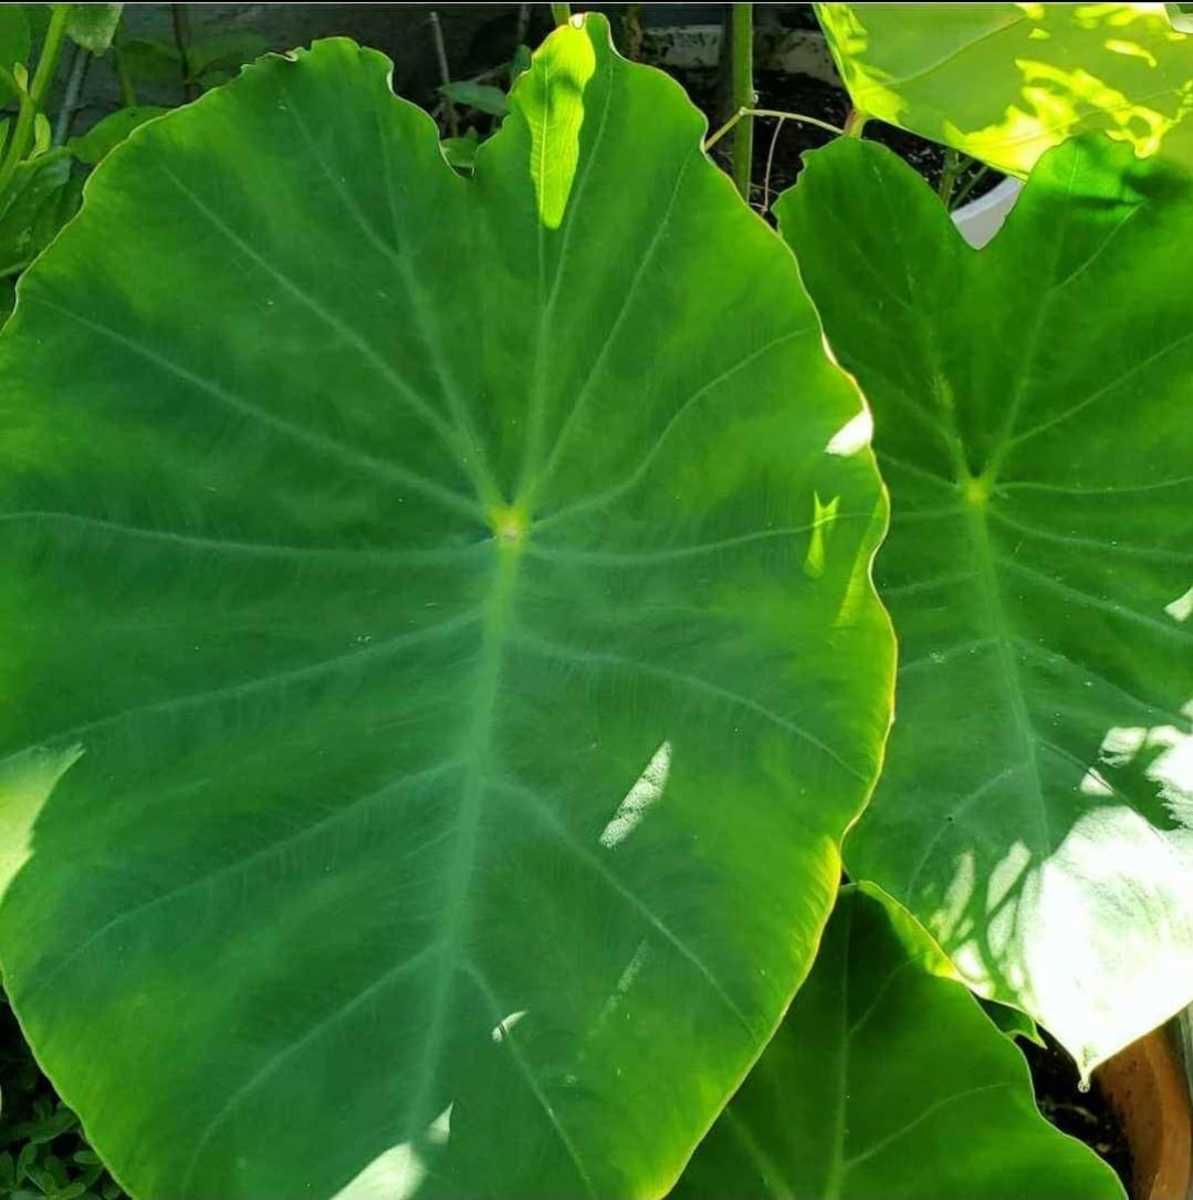 Growing And Consumption of Taro, How to Properly Prepare Taro Stems for Cooking